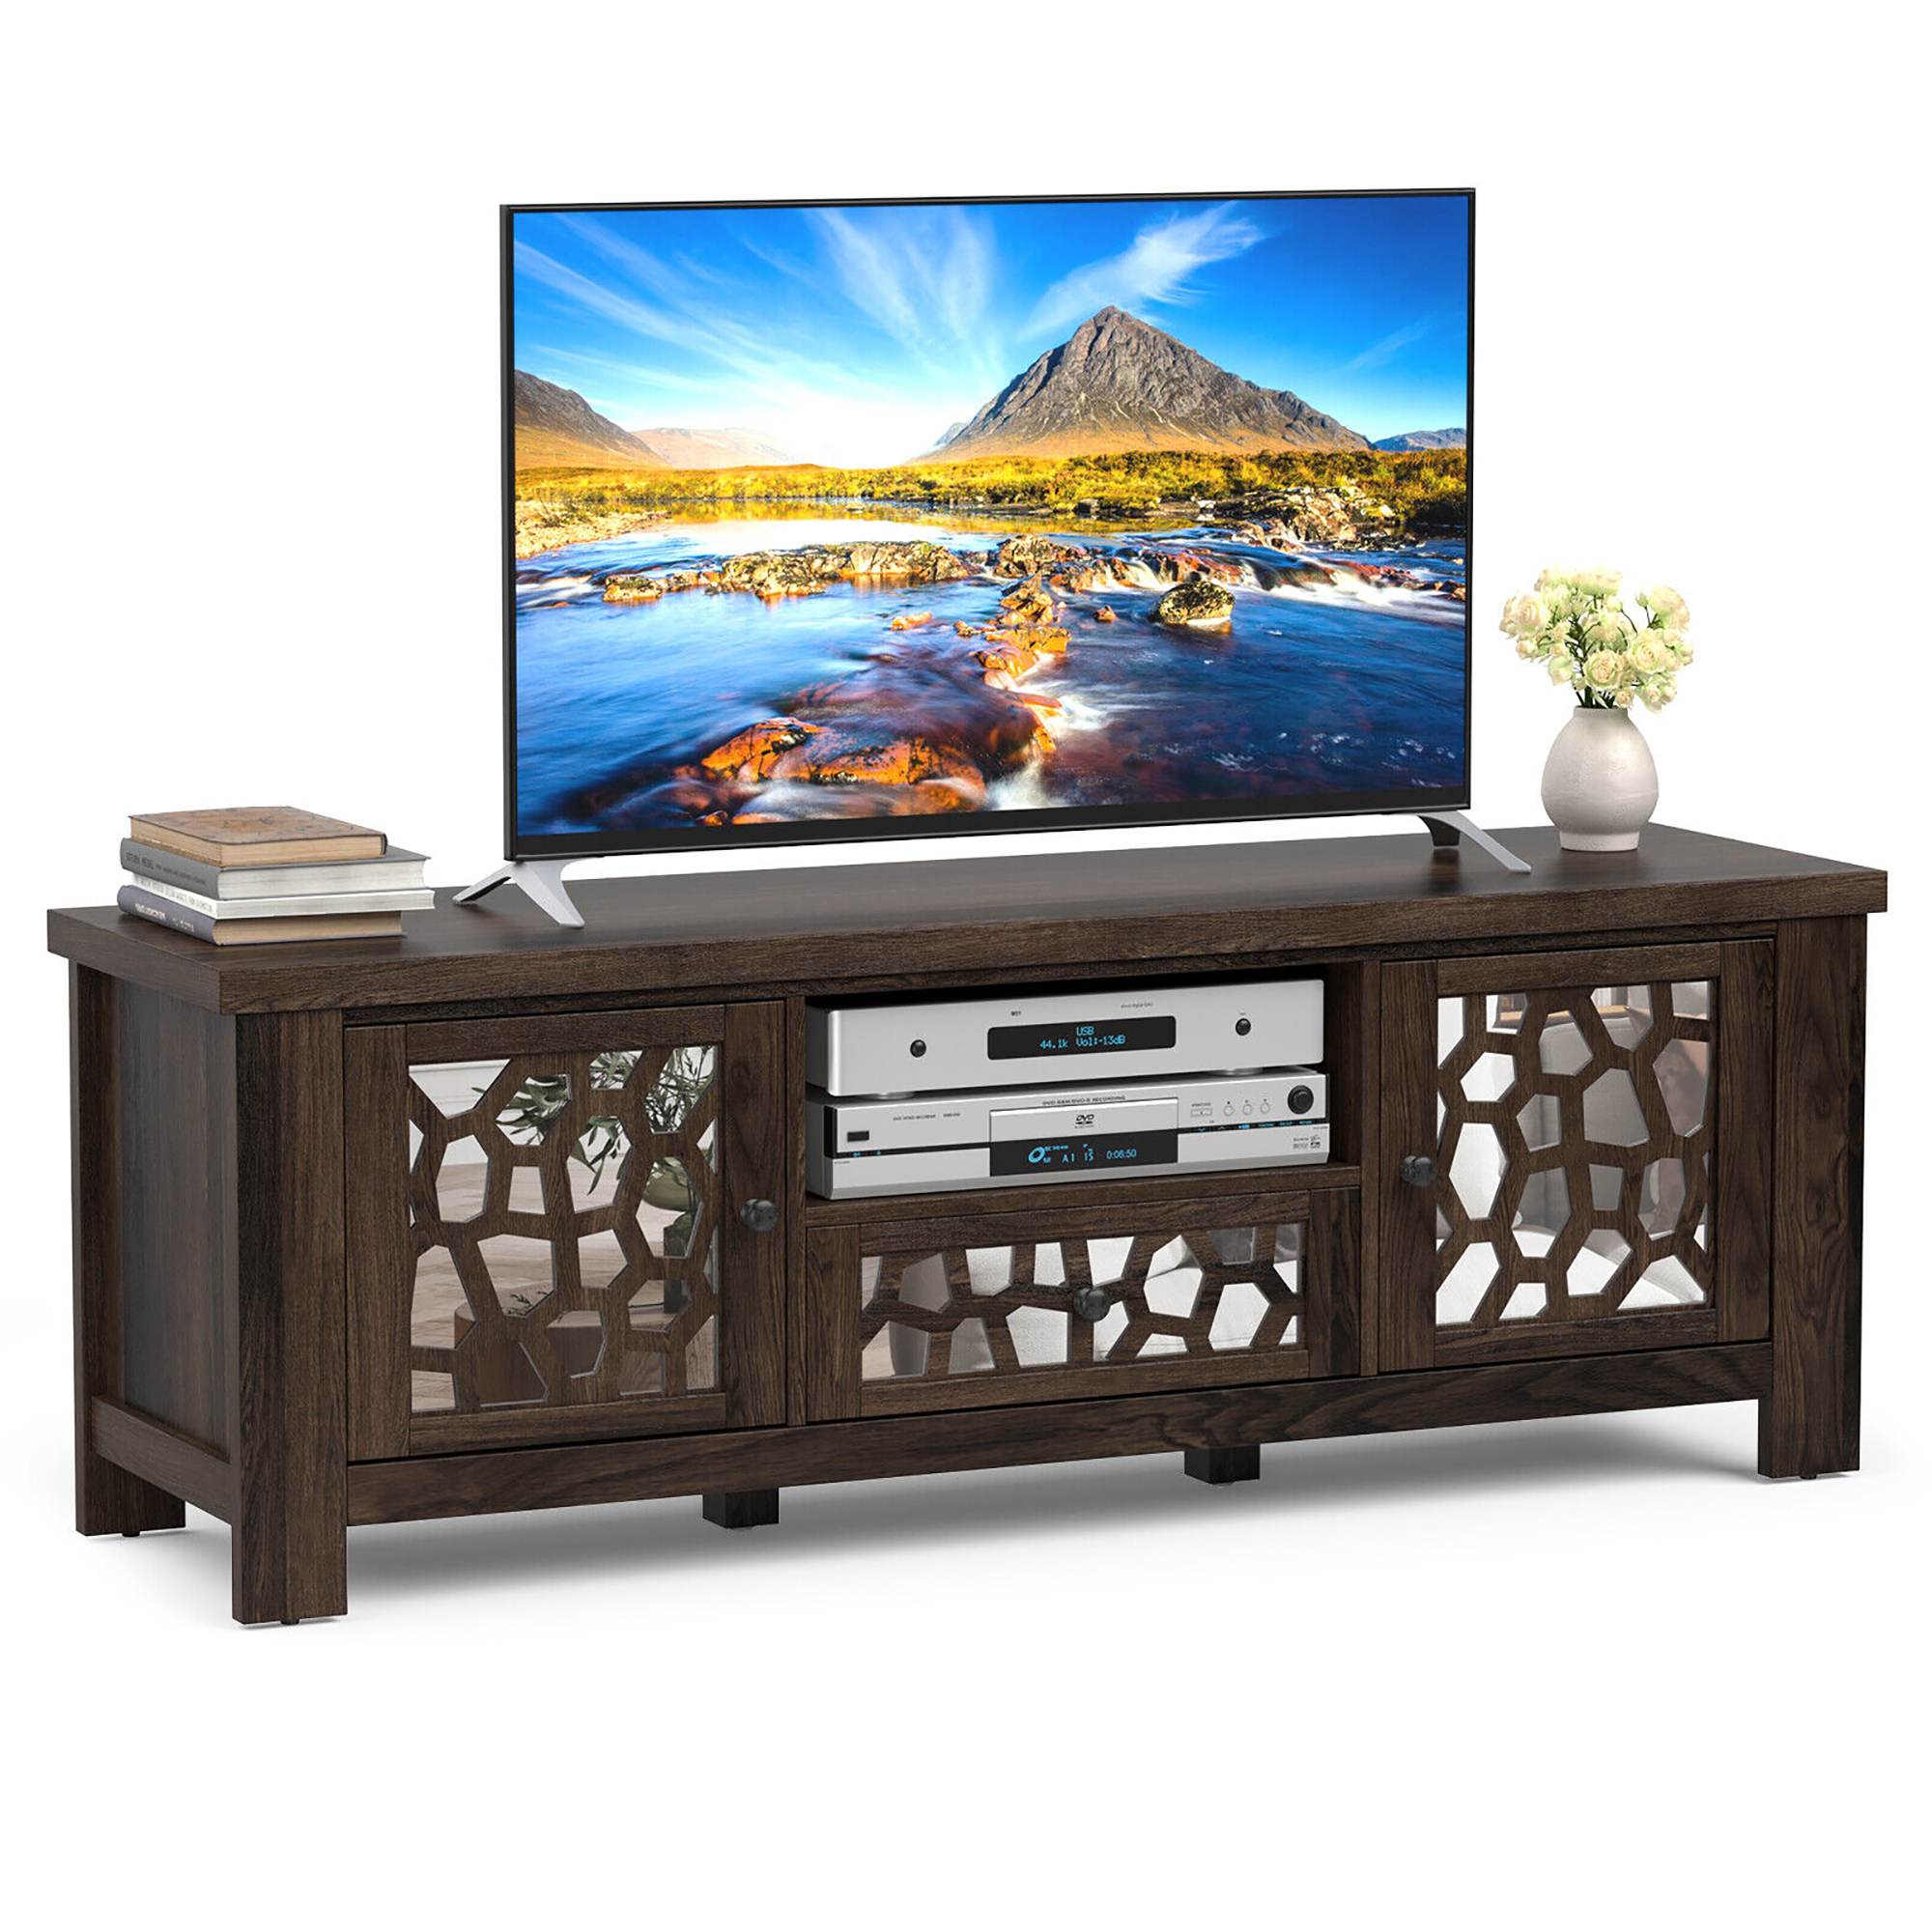 Gymax 55'' Retro TV Stand Media Entertainment Center w/ Mirror Doors & Drawer Brown